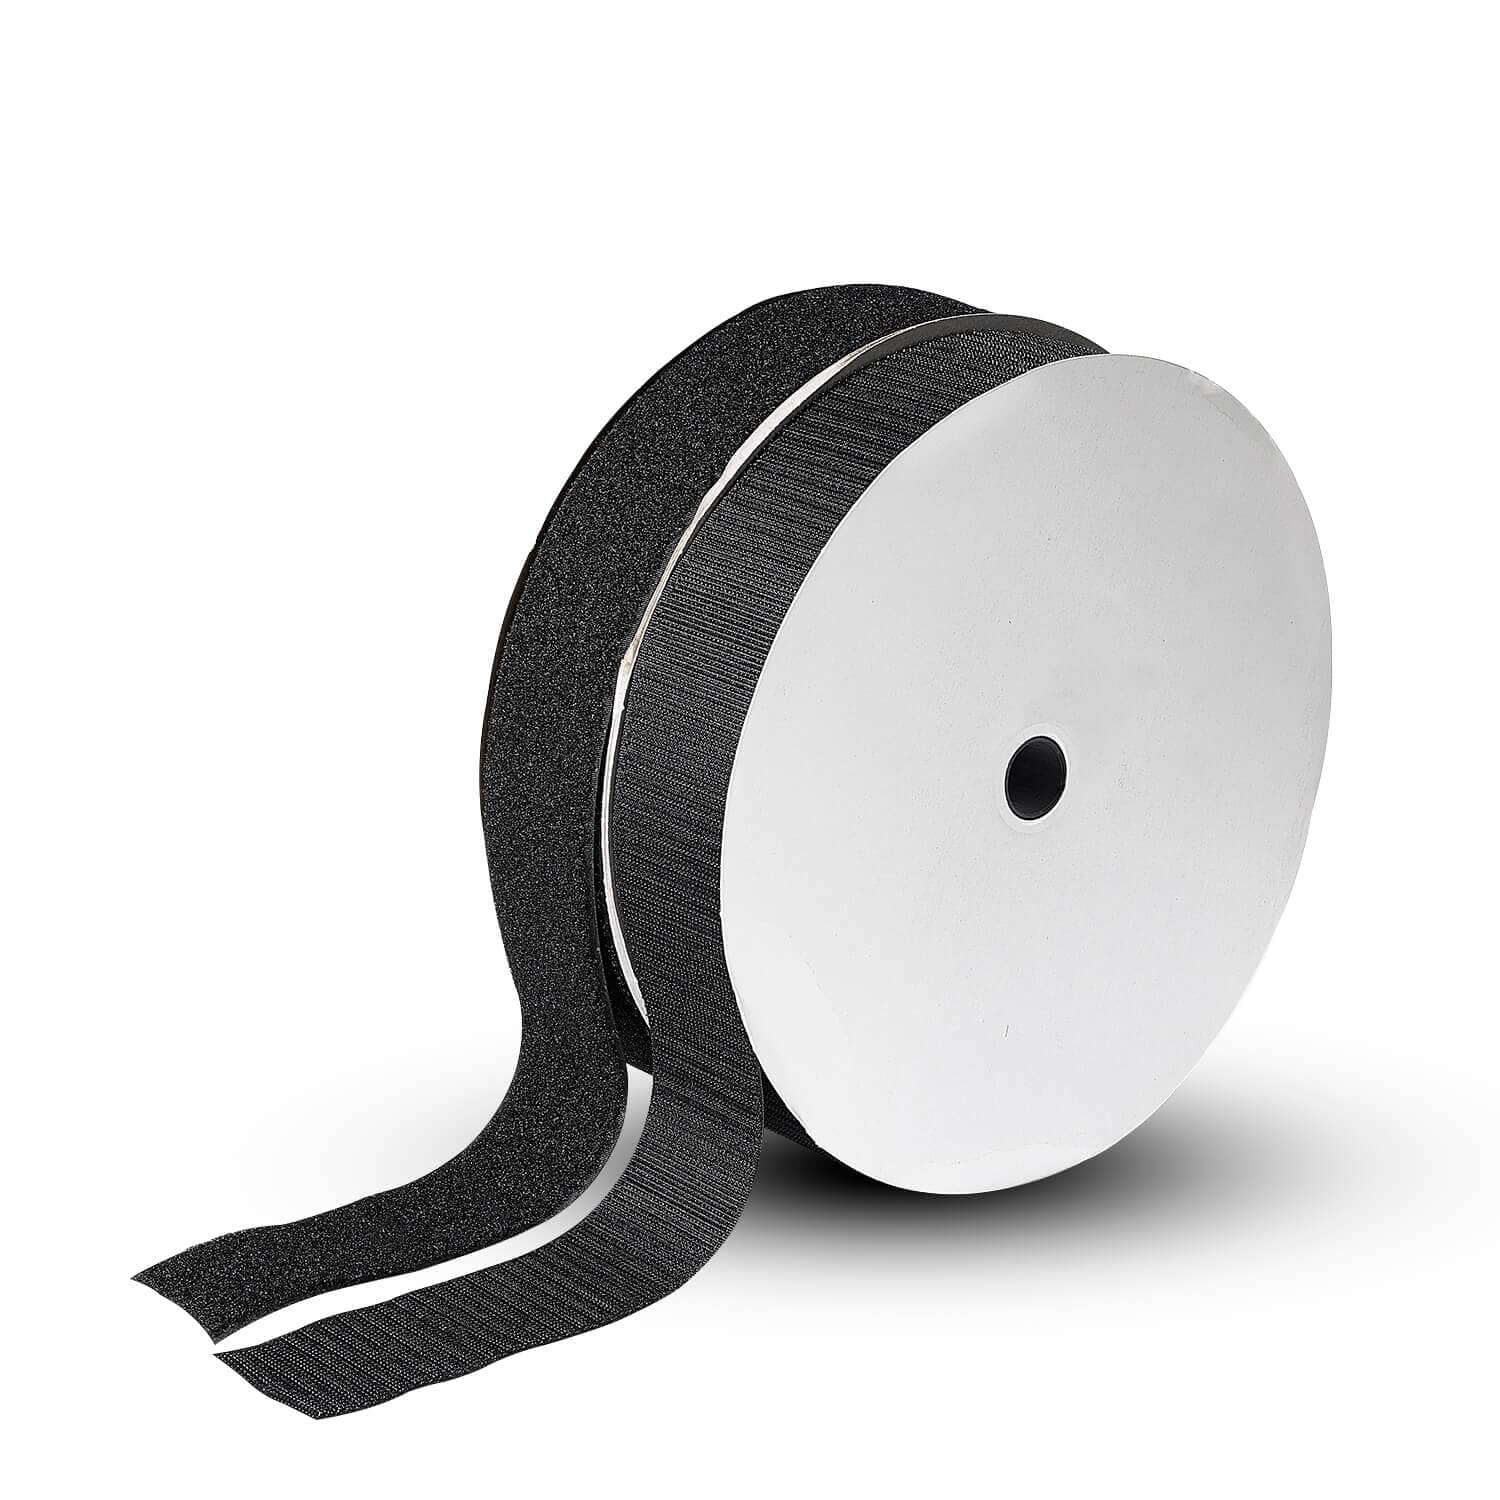 2 Inch Velcro Roll for upholstery projects on sale adhesive-backed loop  only - Black